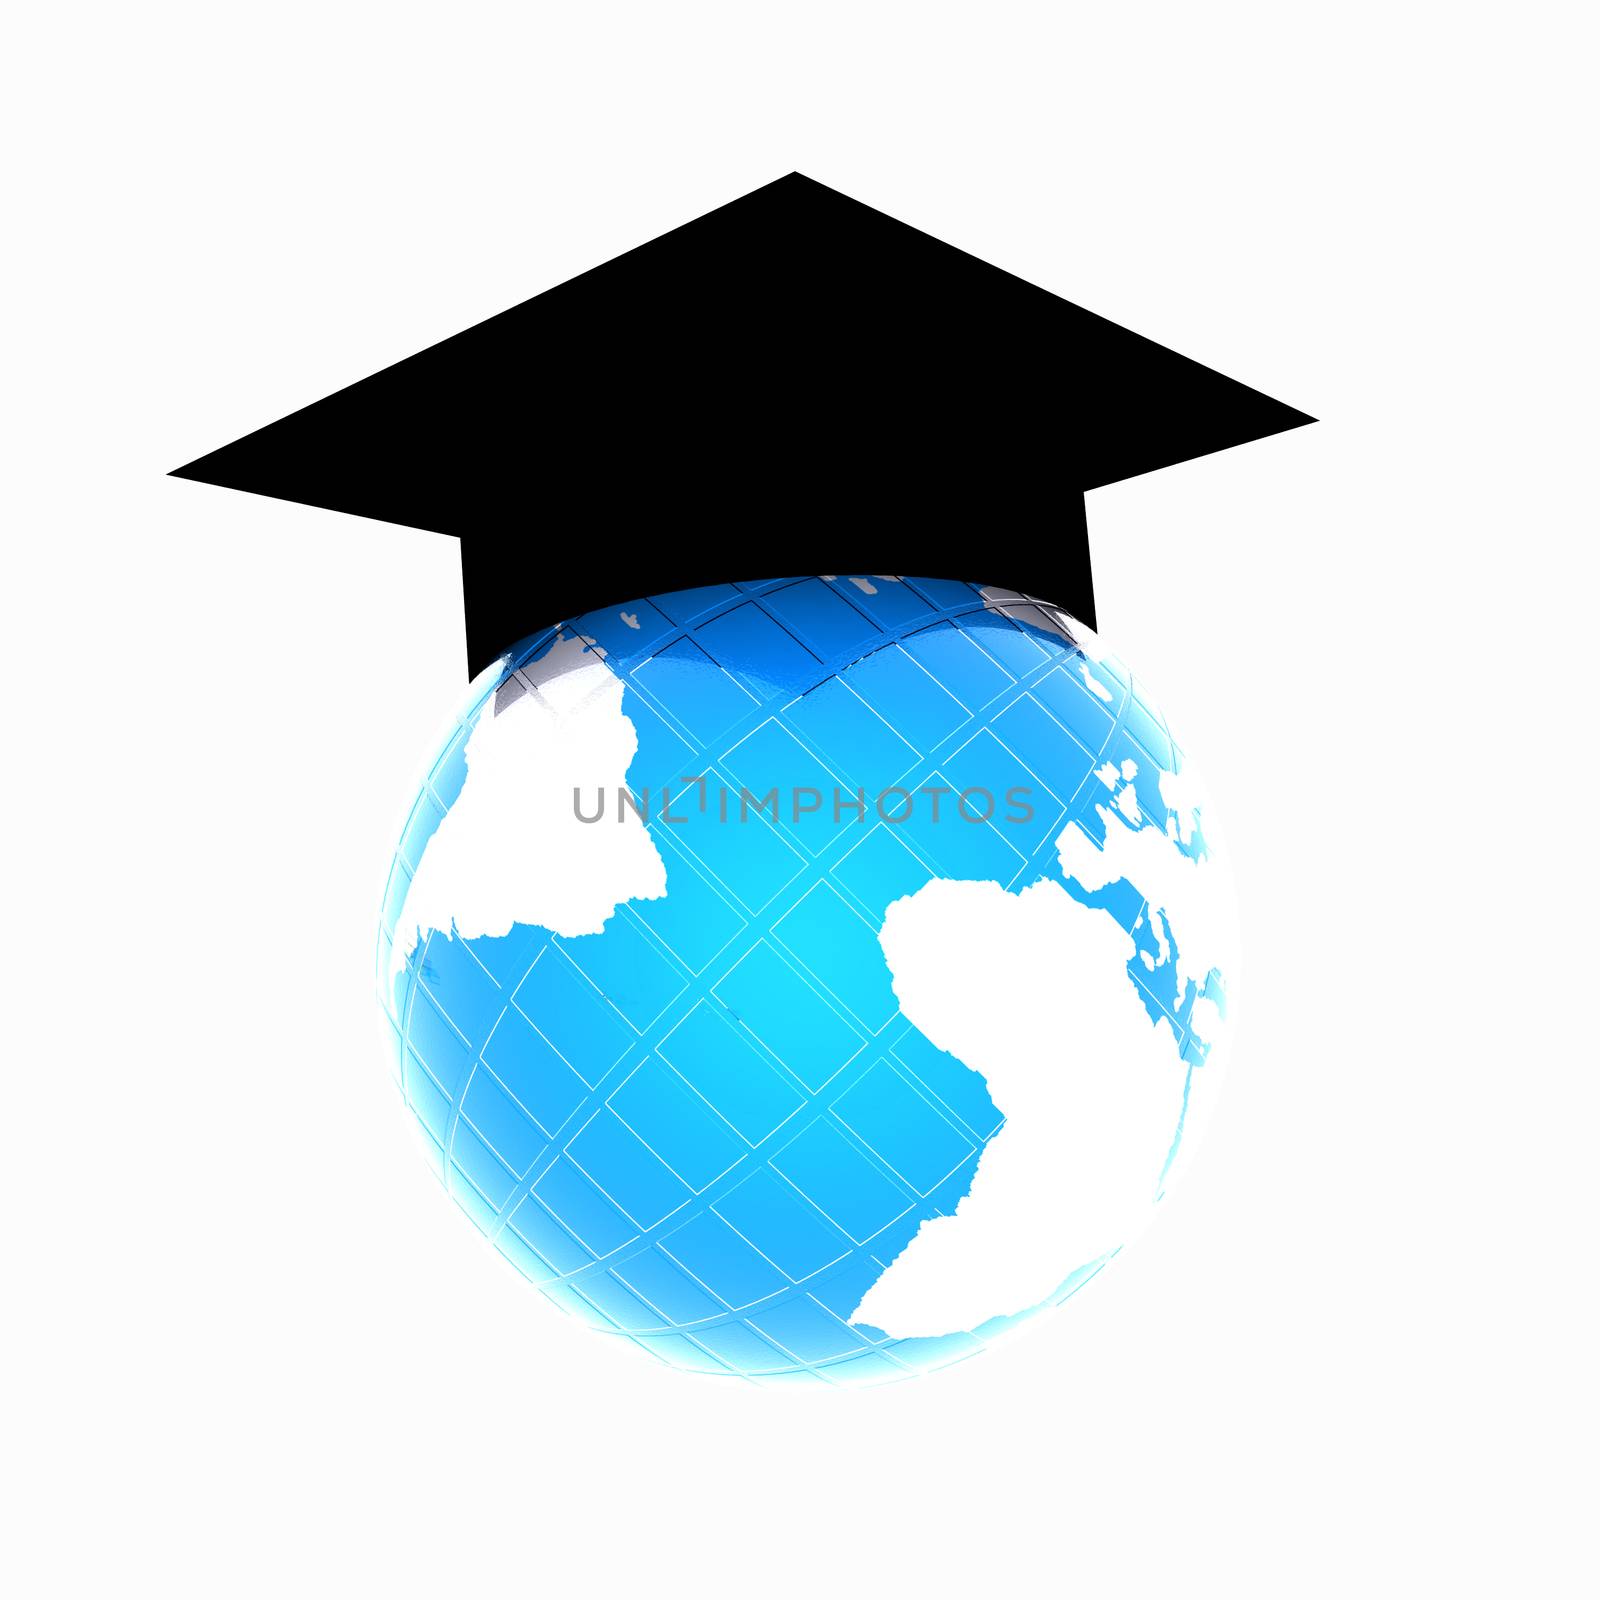 Global Education on a white background